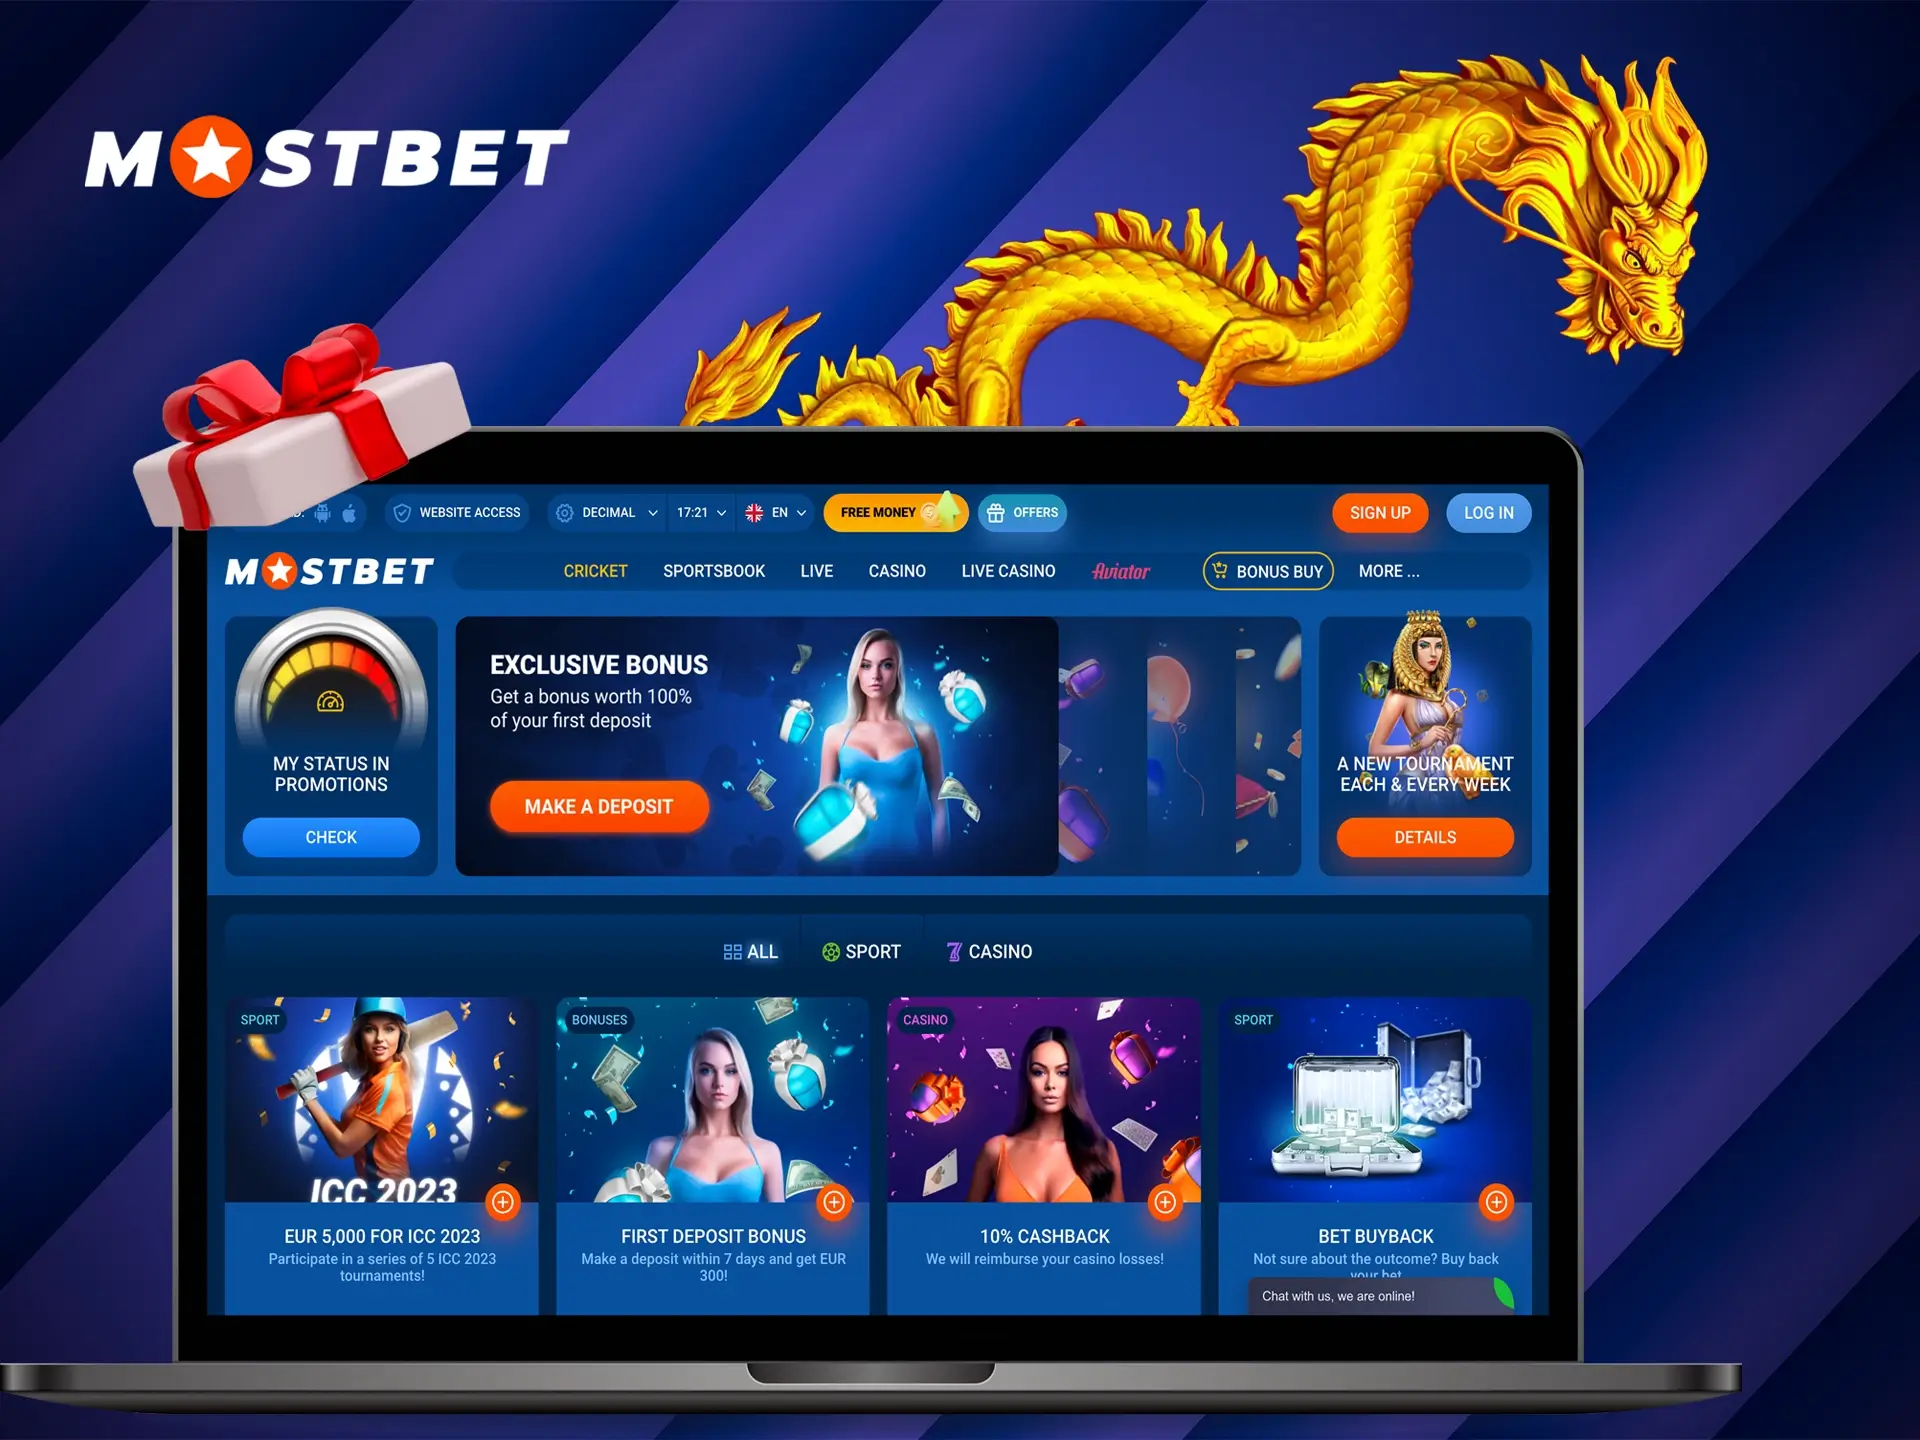 There are plenty more promotions at Mostbet that will help at the start and give a lot of excitement to the novice player.